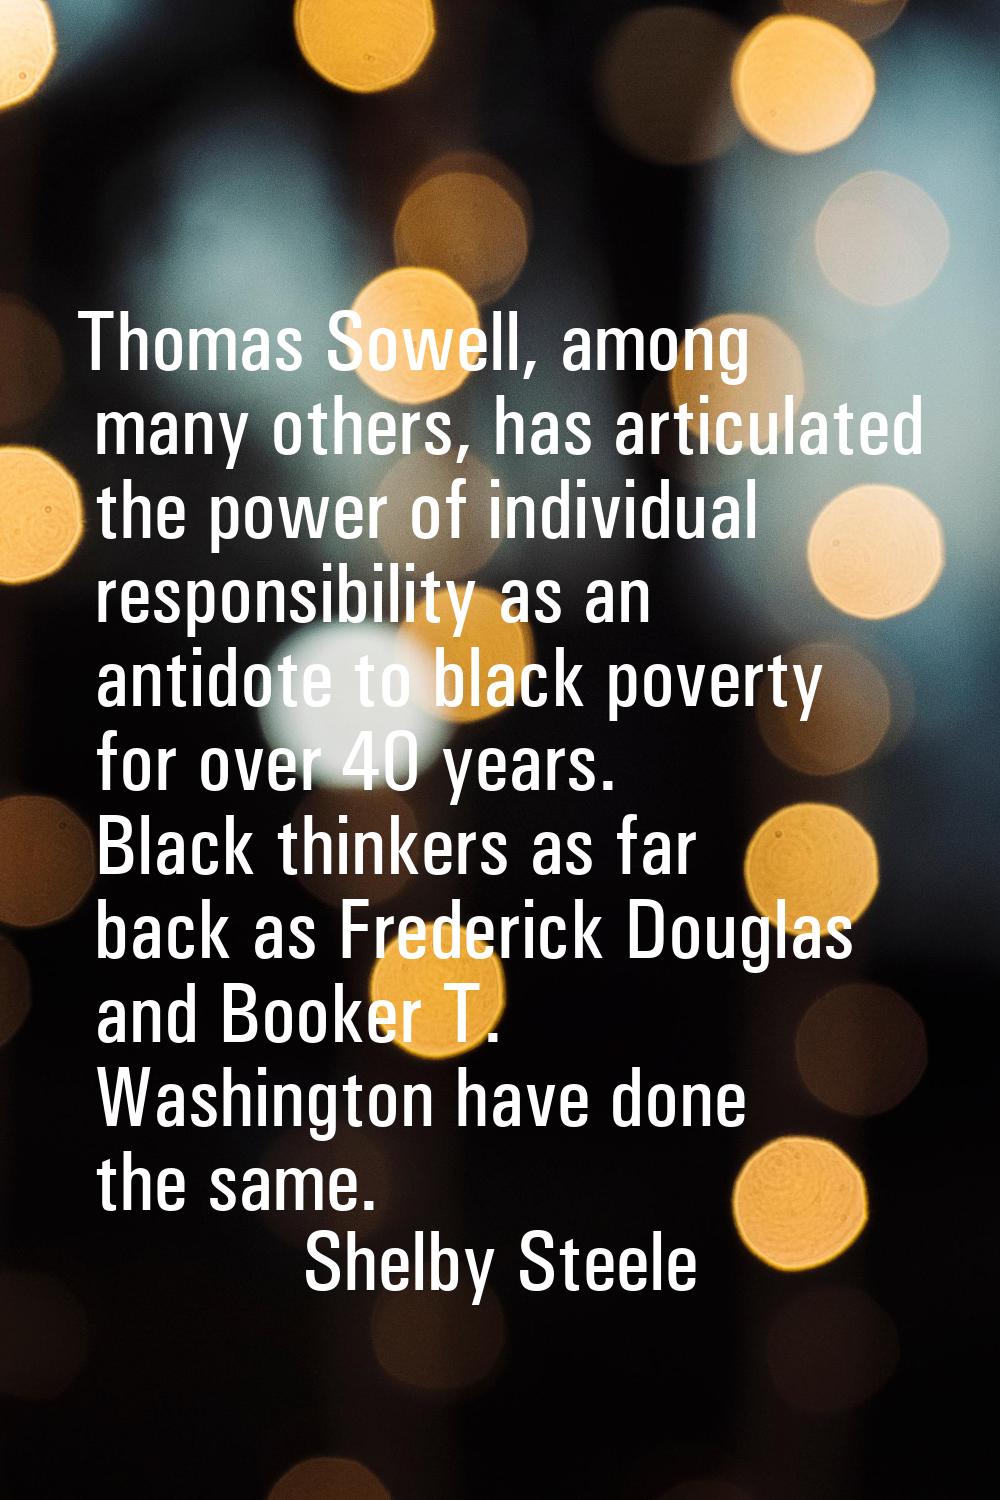 Thomas Sowell, among many others, has articulated the power of individual responsibility as an anti